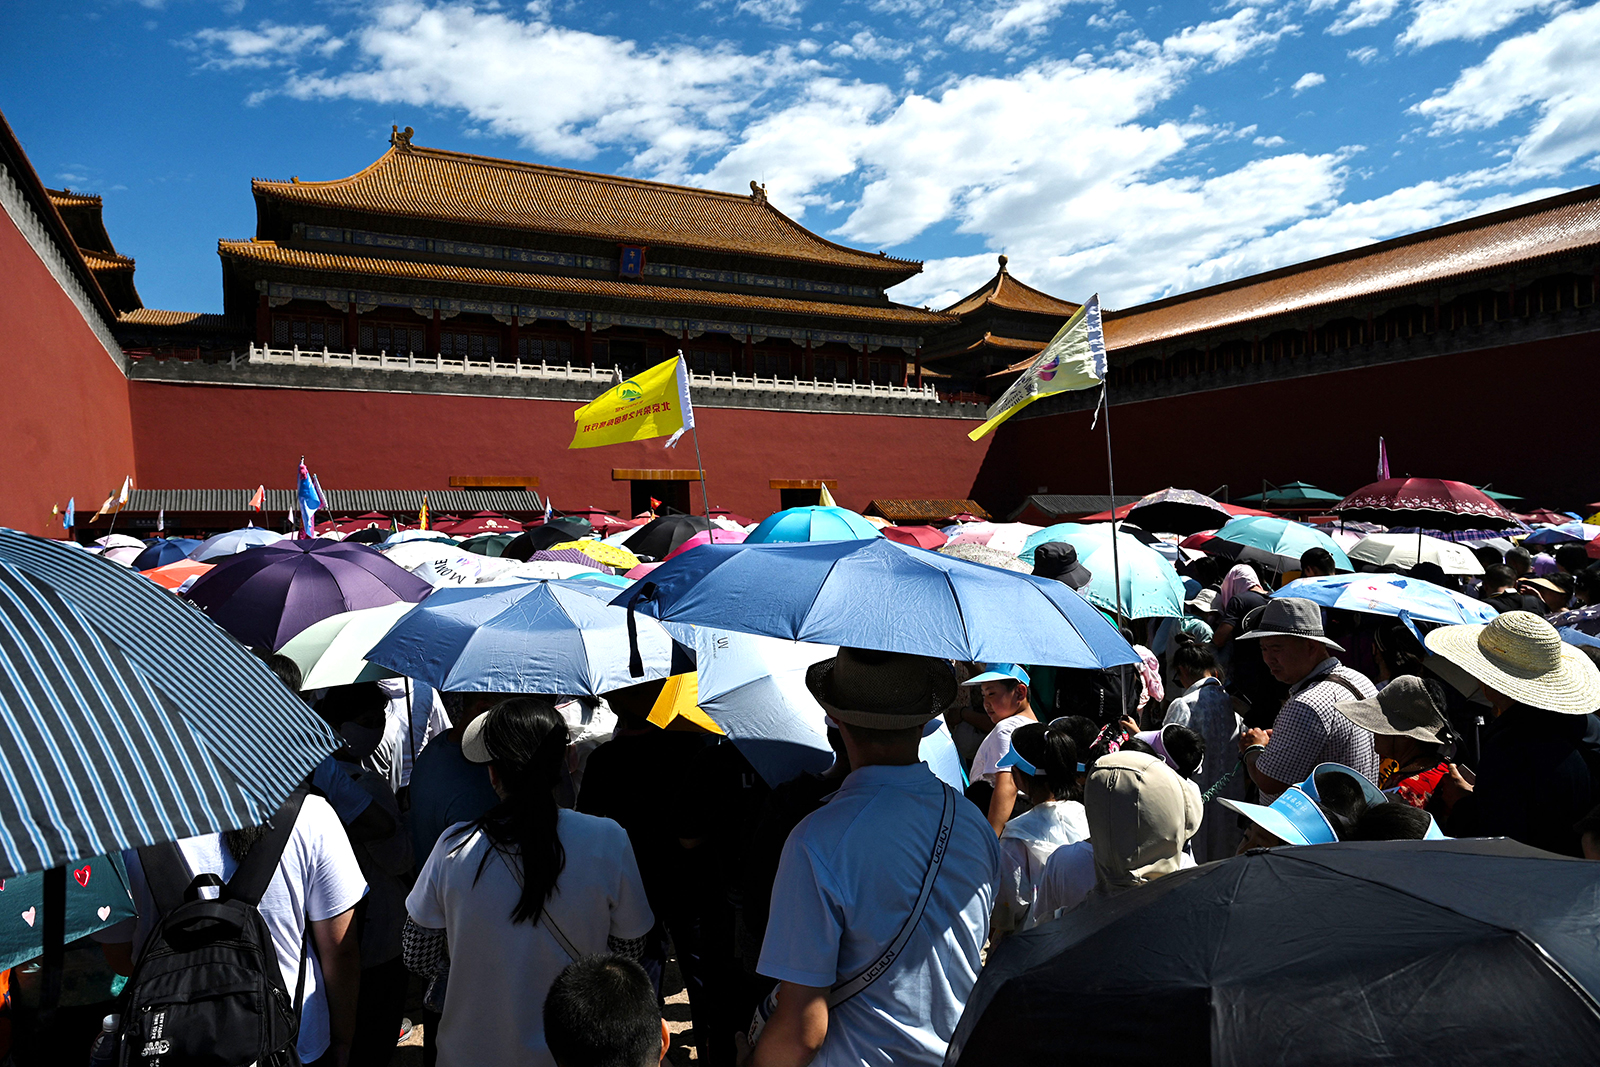 Visitors shelter under umbrellas as they line up to enter the Forbidden City on a hot day in Beijing on July 9.